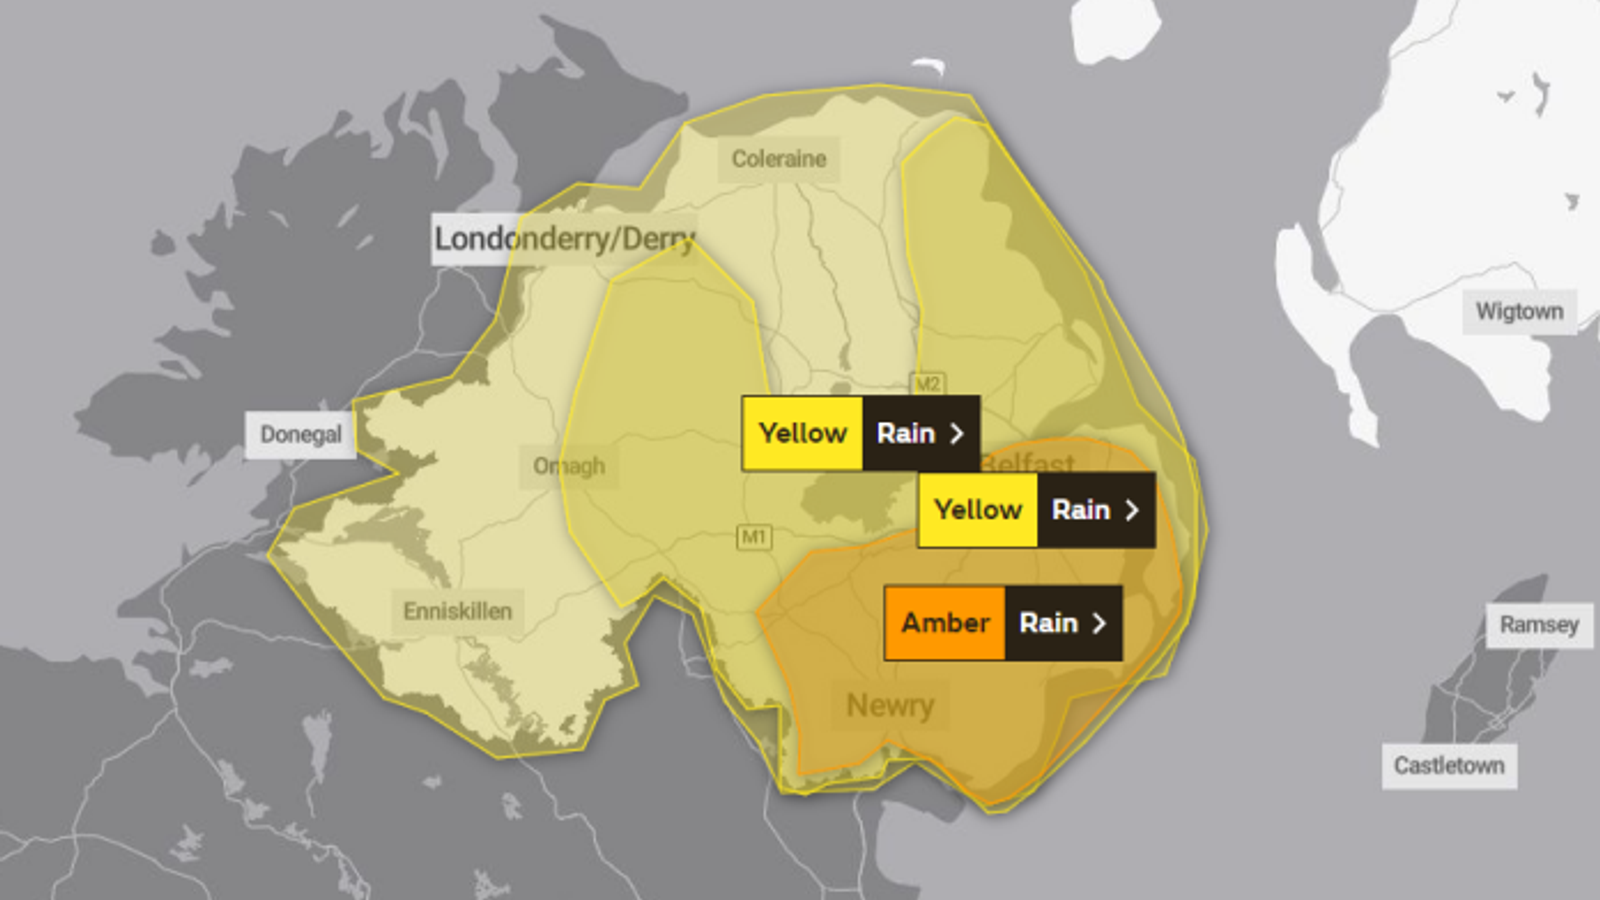 UK weather: Storm Ciaran to bring 'nasty' weather with 80mph gusts and up to 60mm of rain as amber warning issued